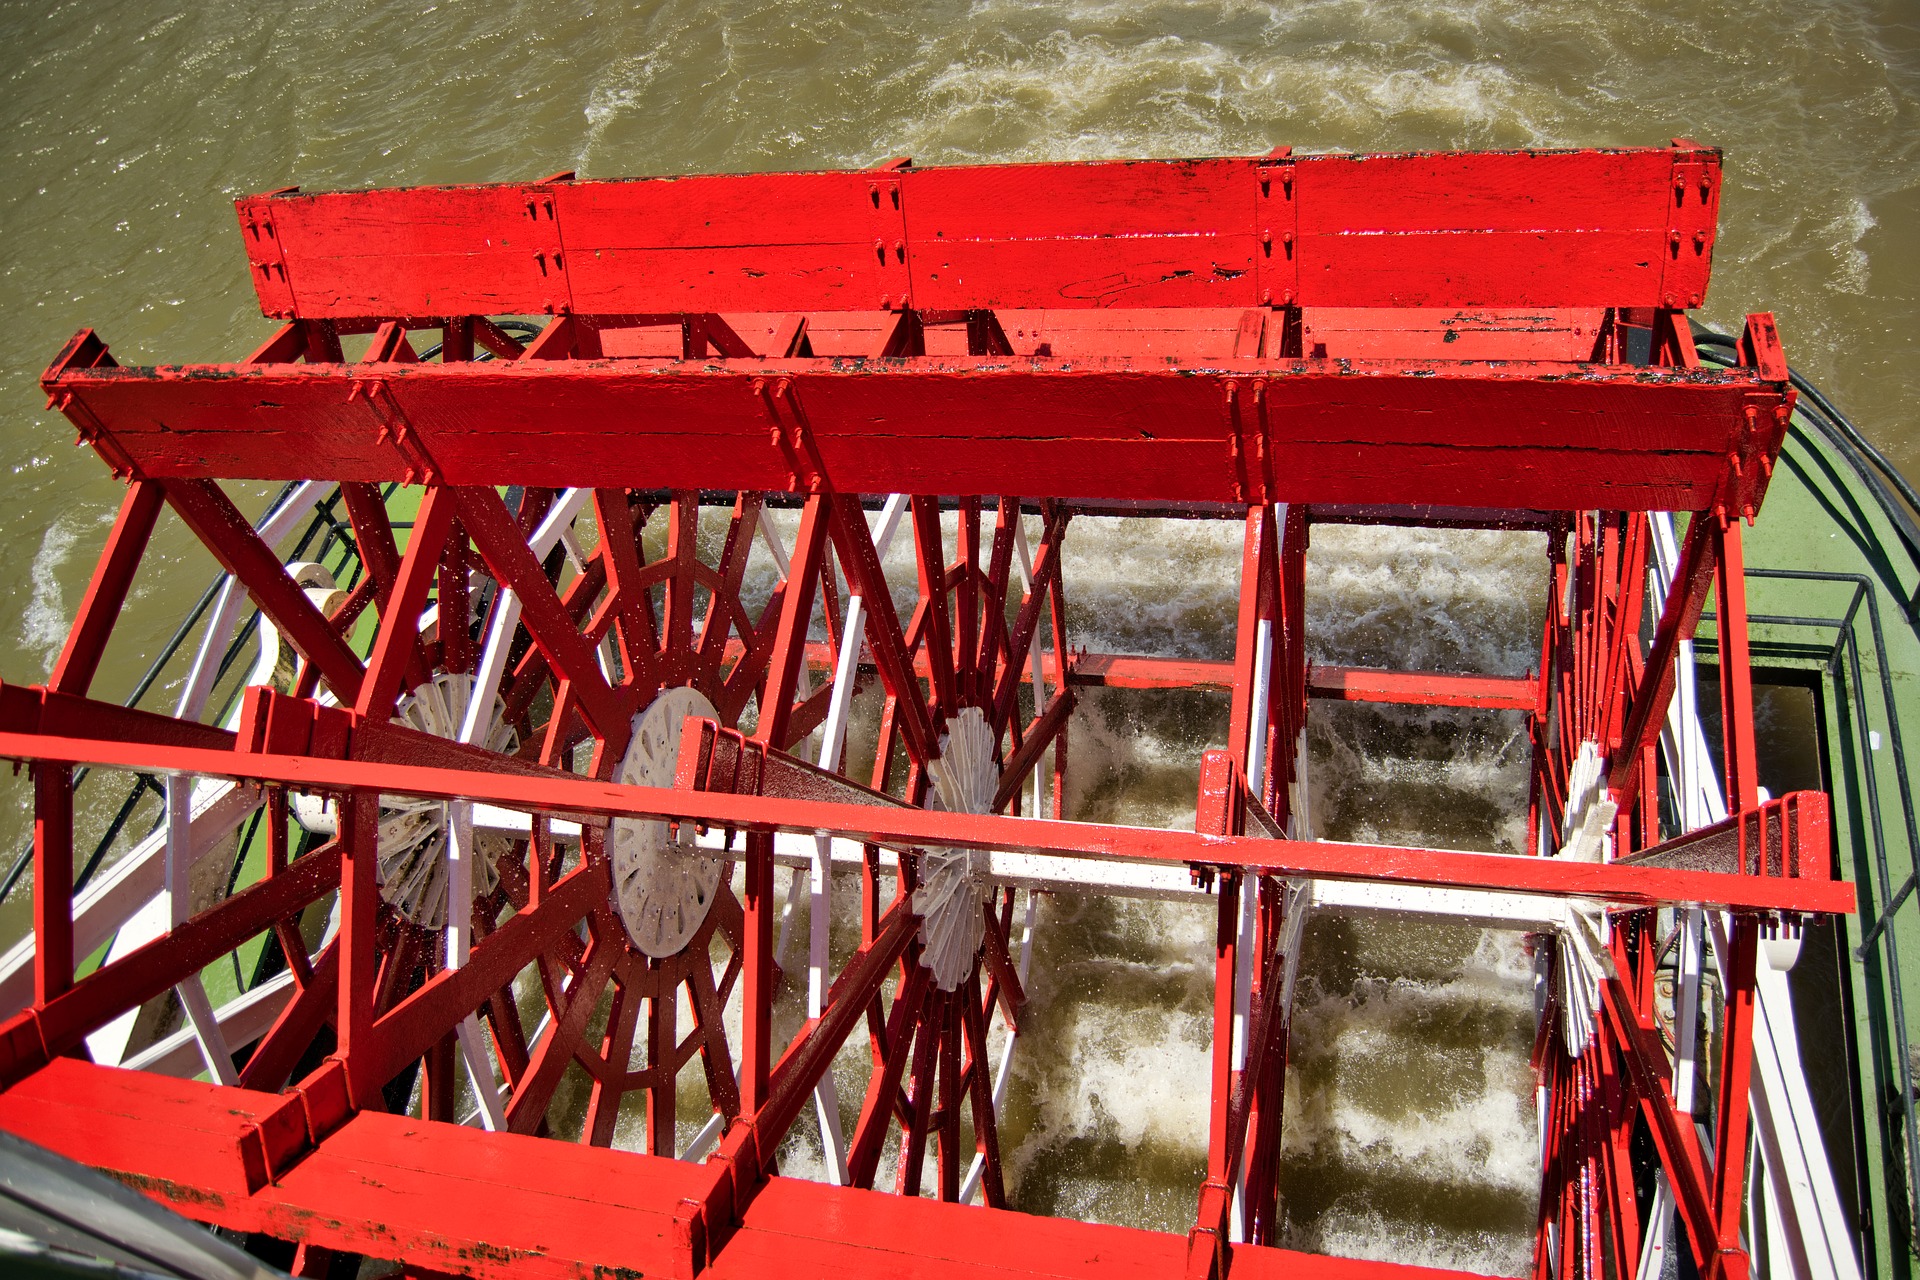 close up of red paddlewheel for a steamboat with river below it